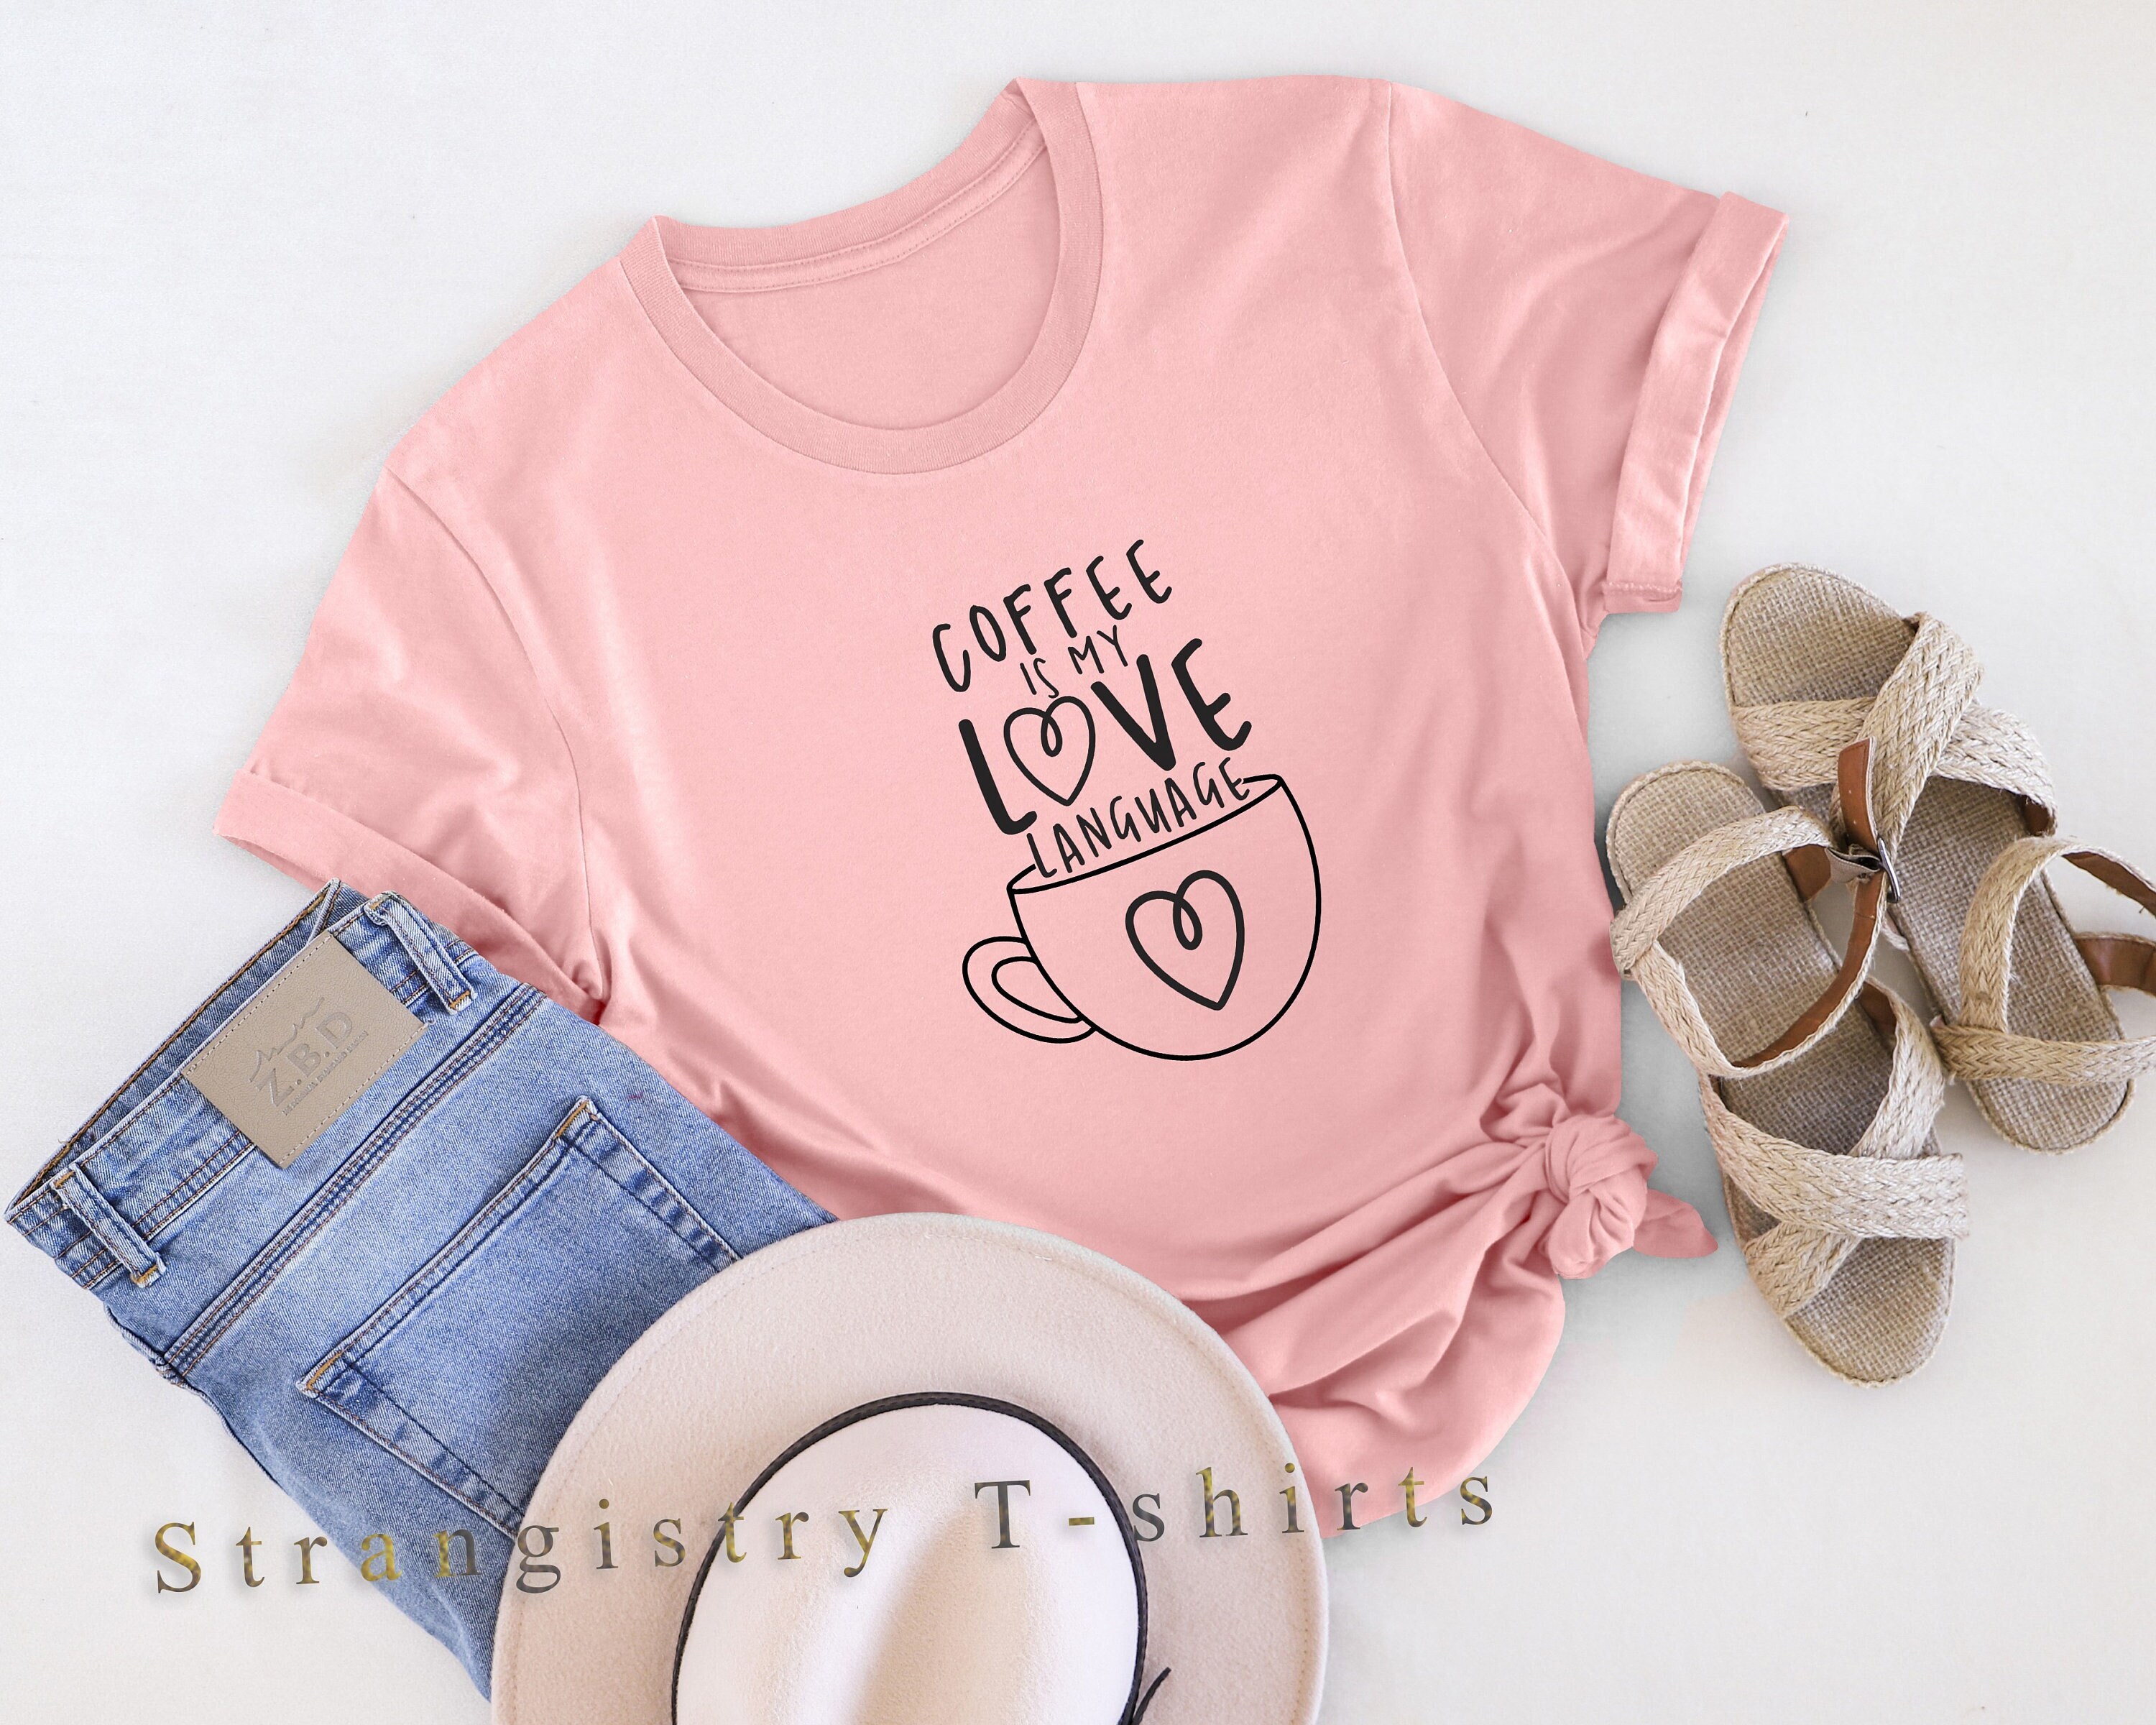 Coffee is My Love Language, Sarcastic Shirts, Funny Shirts, Sassy Women, Retirement Shirts For Women, Mom Shirts, Sassy Shirt, Wife Shirt